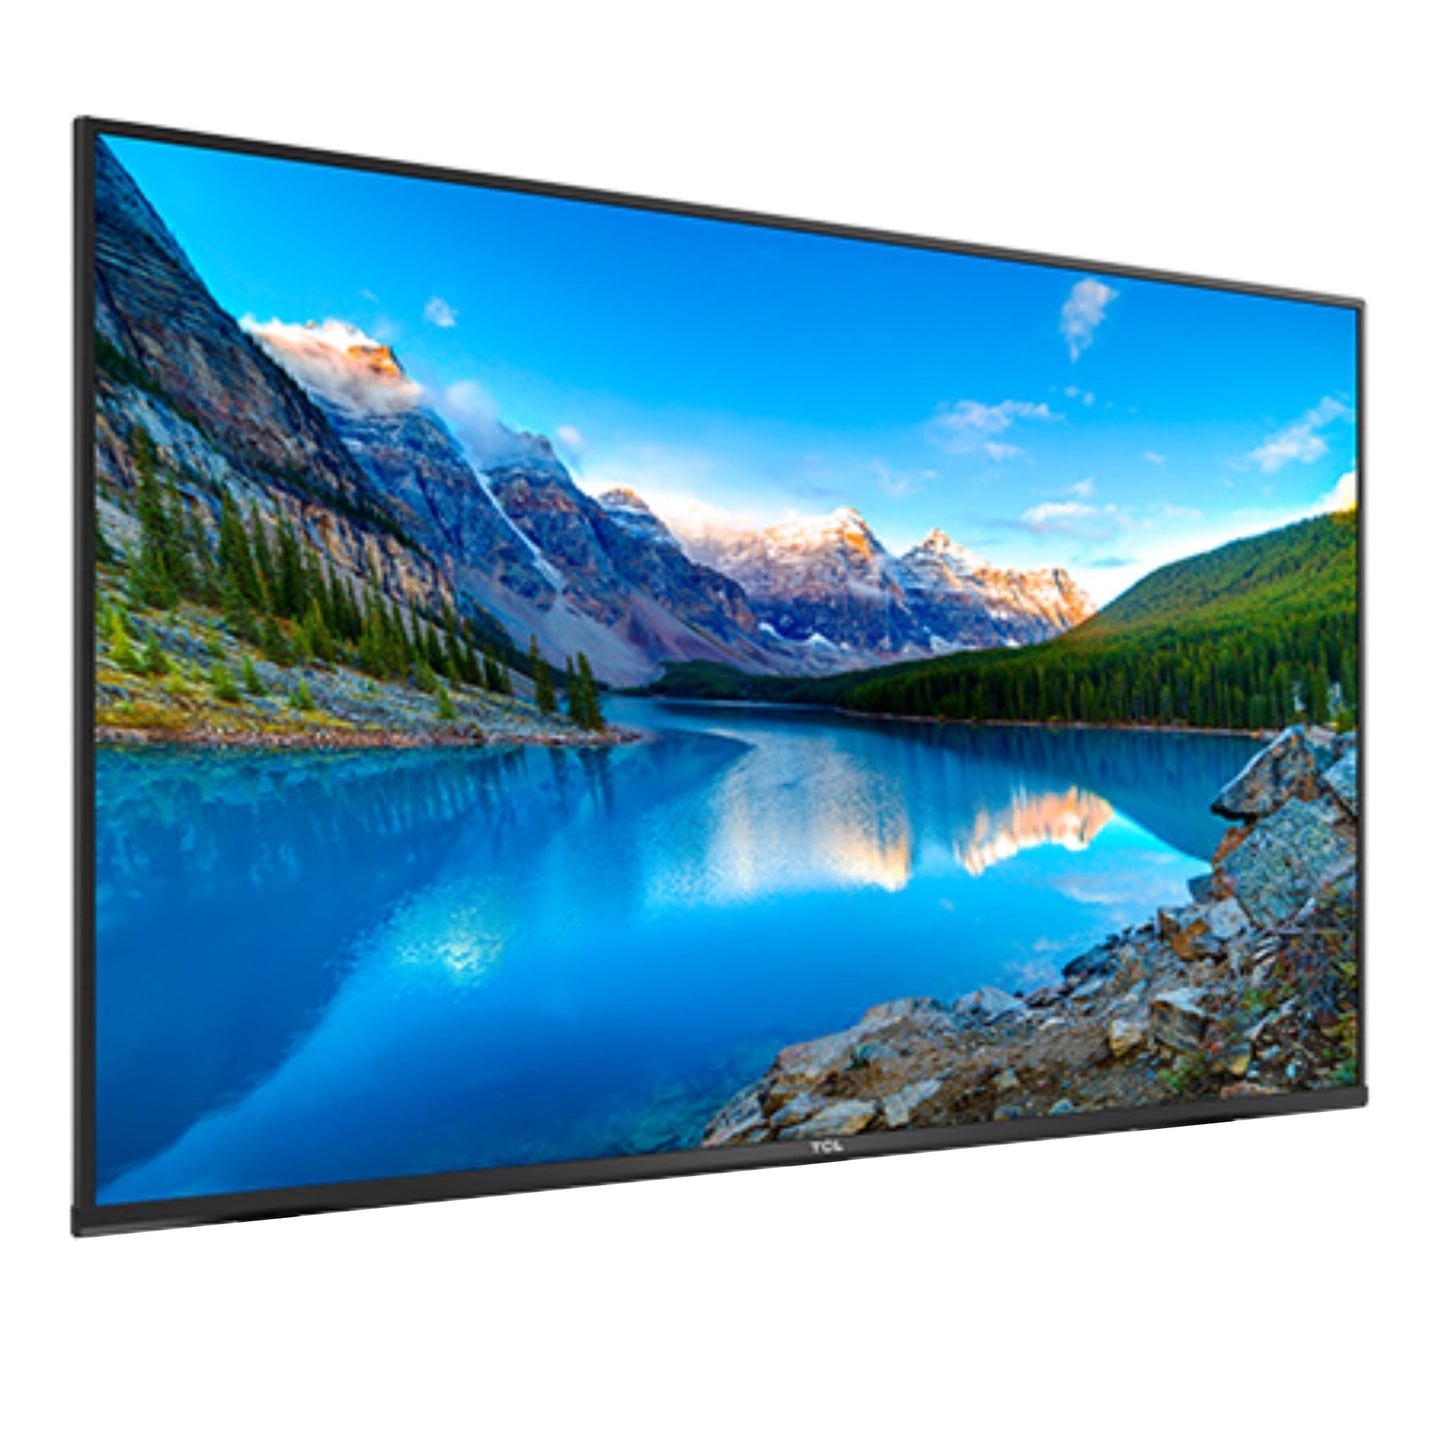 TCL 85 inch Smart TV, 85P735